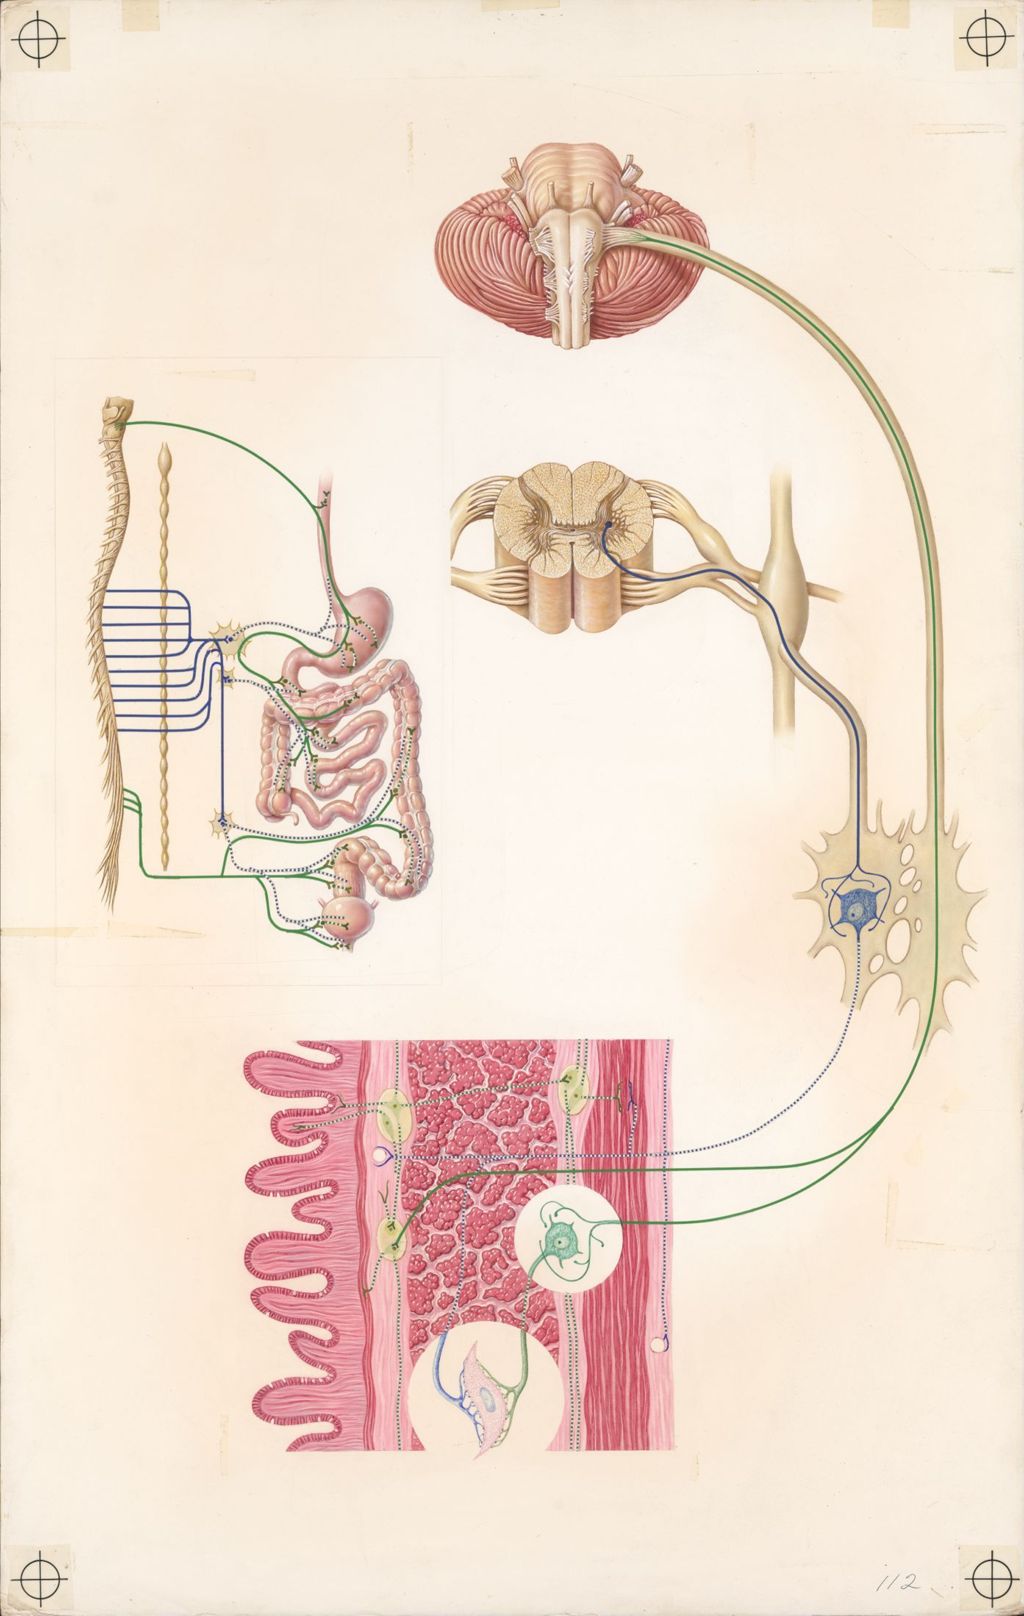 Miniature of Medical Profiles, Plate II, Urocholine and the Autonomic Nervous System